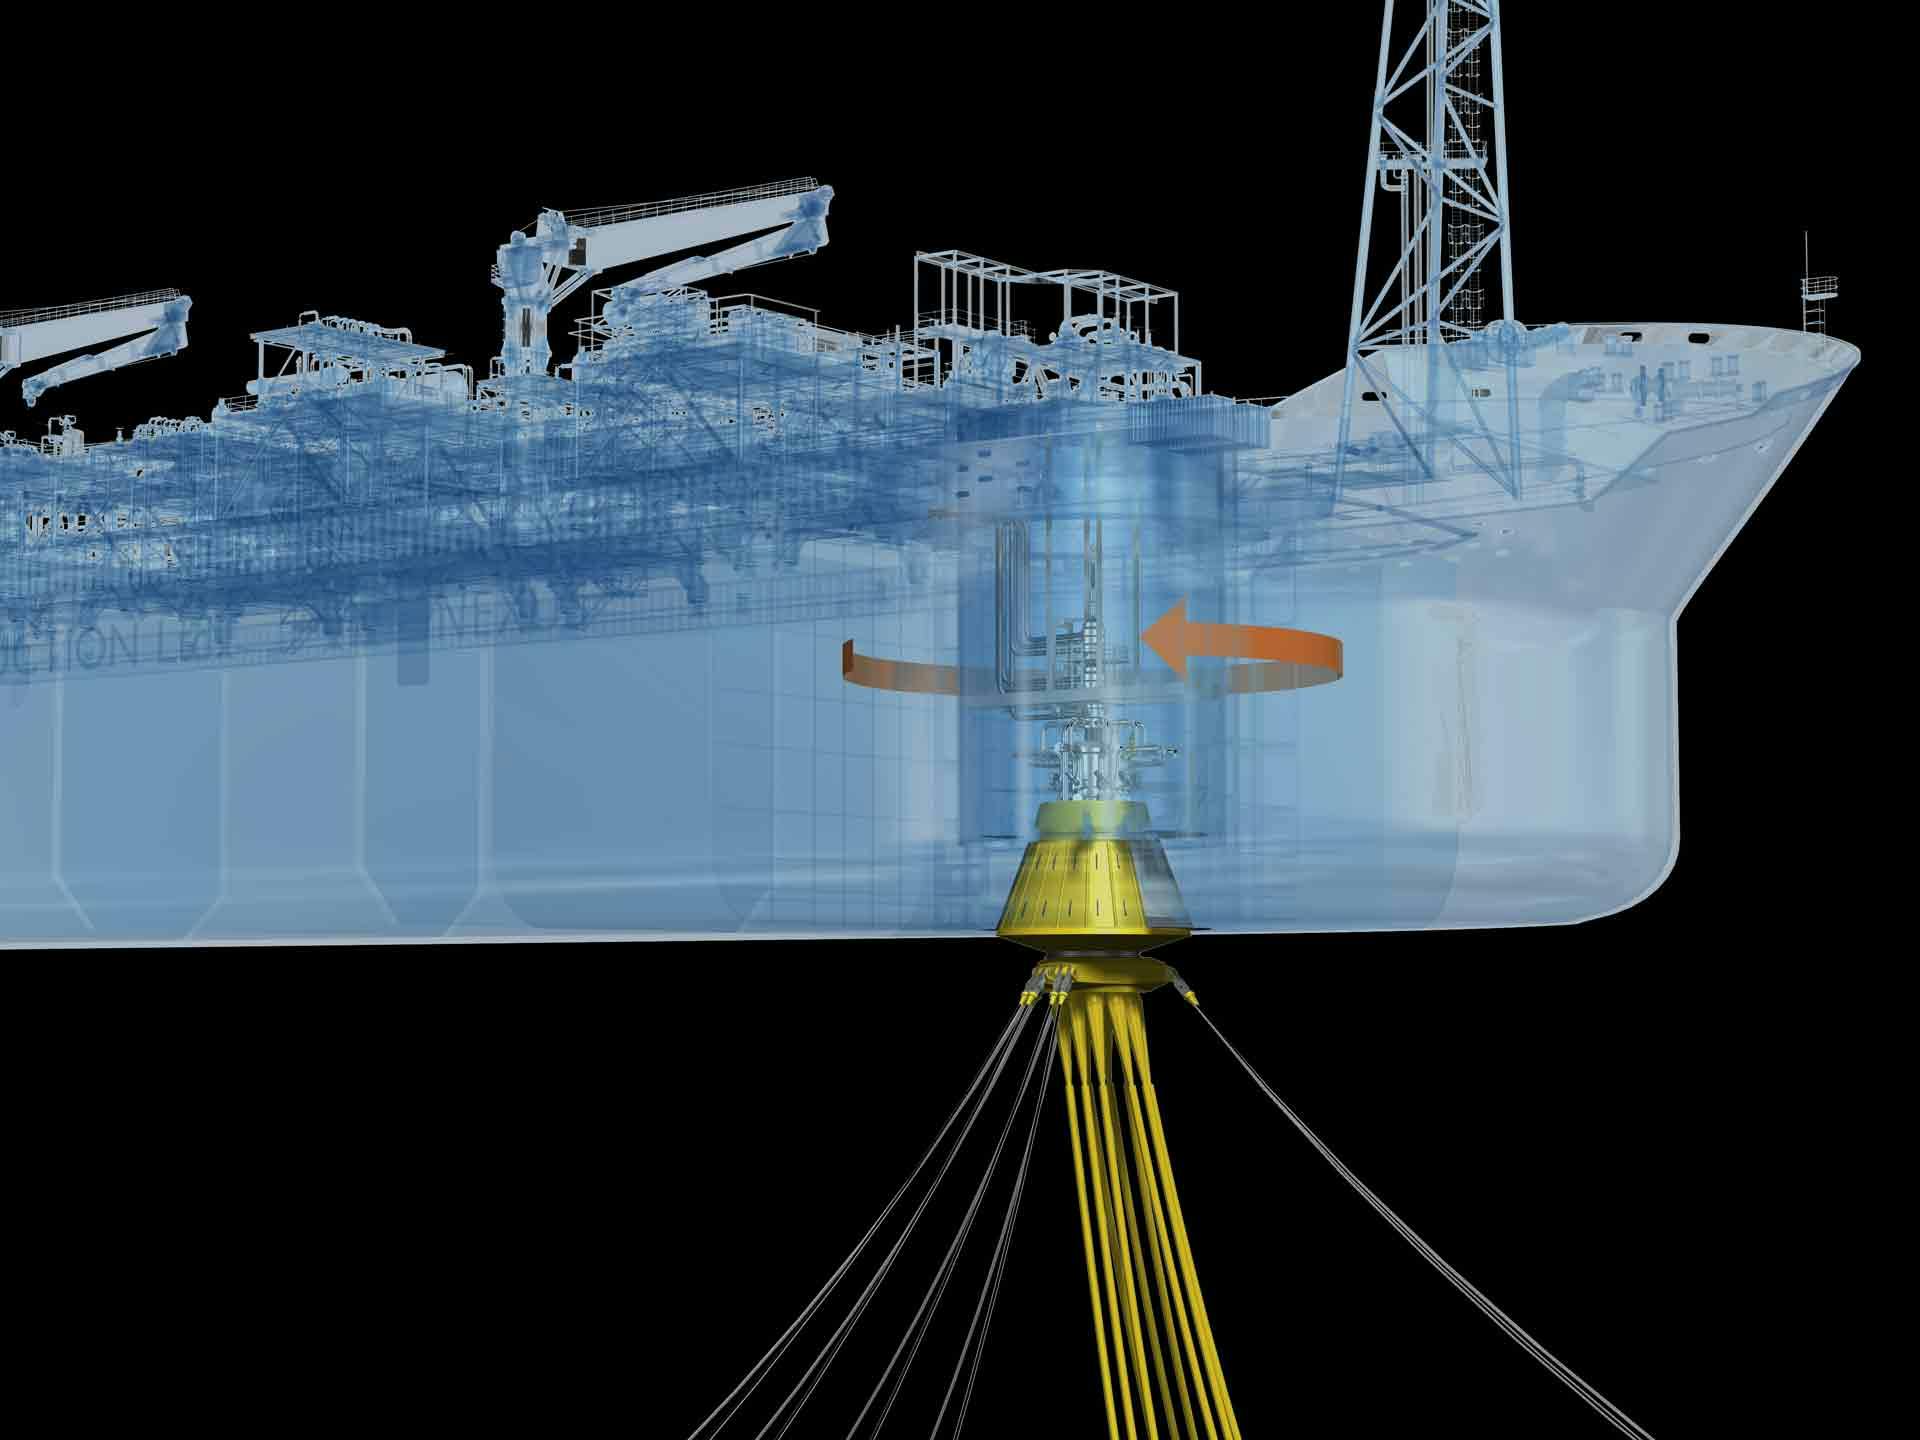 A render of an STP turret mooring system for FPSO vessels